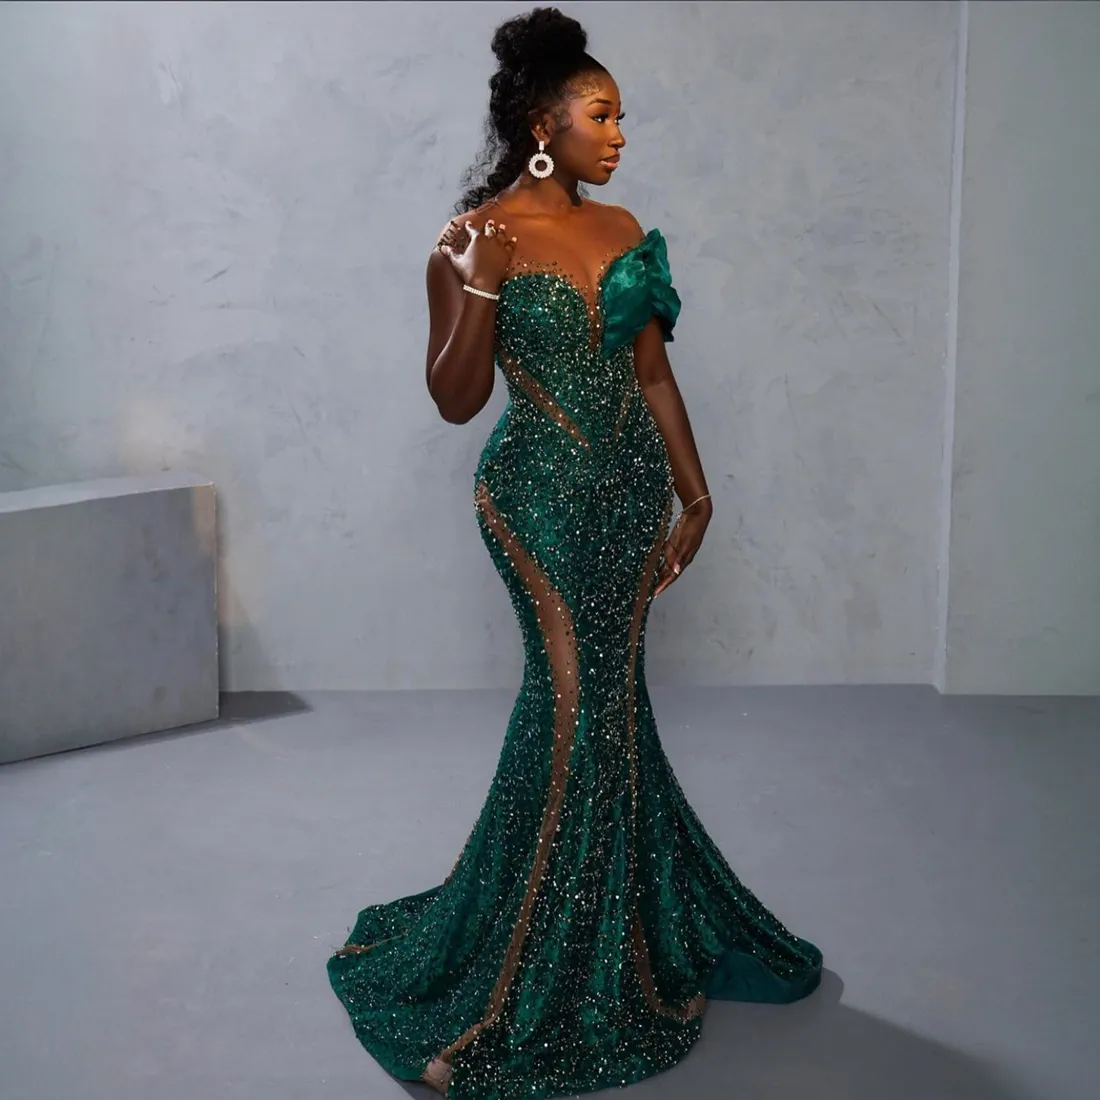 African Nigeria Plus Size Prom Dresses for Black Women Illusion Sheer Neck Mermaid Short Sleeves Sequined Lace Evening Dresses Formal Dress for Birthday Girls AM440